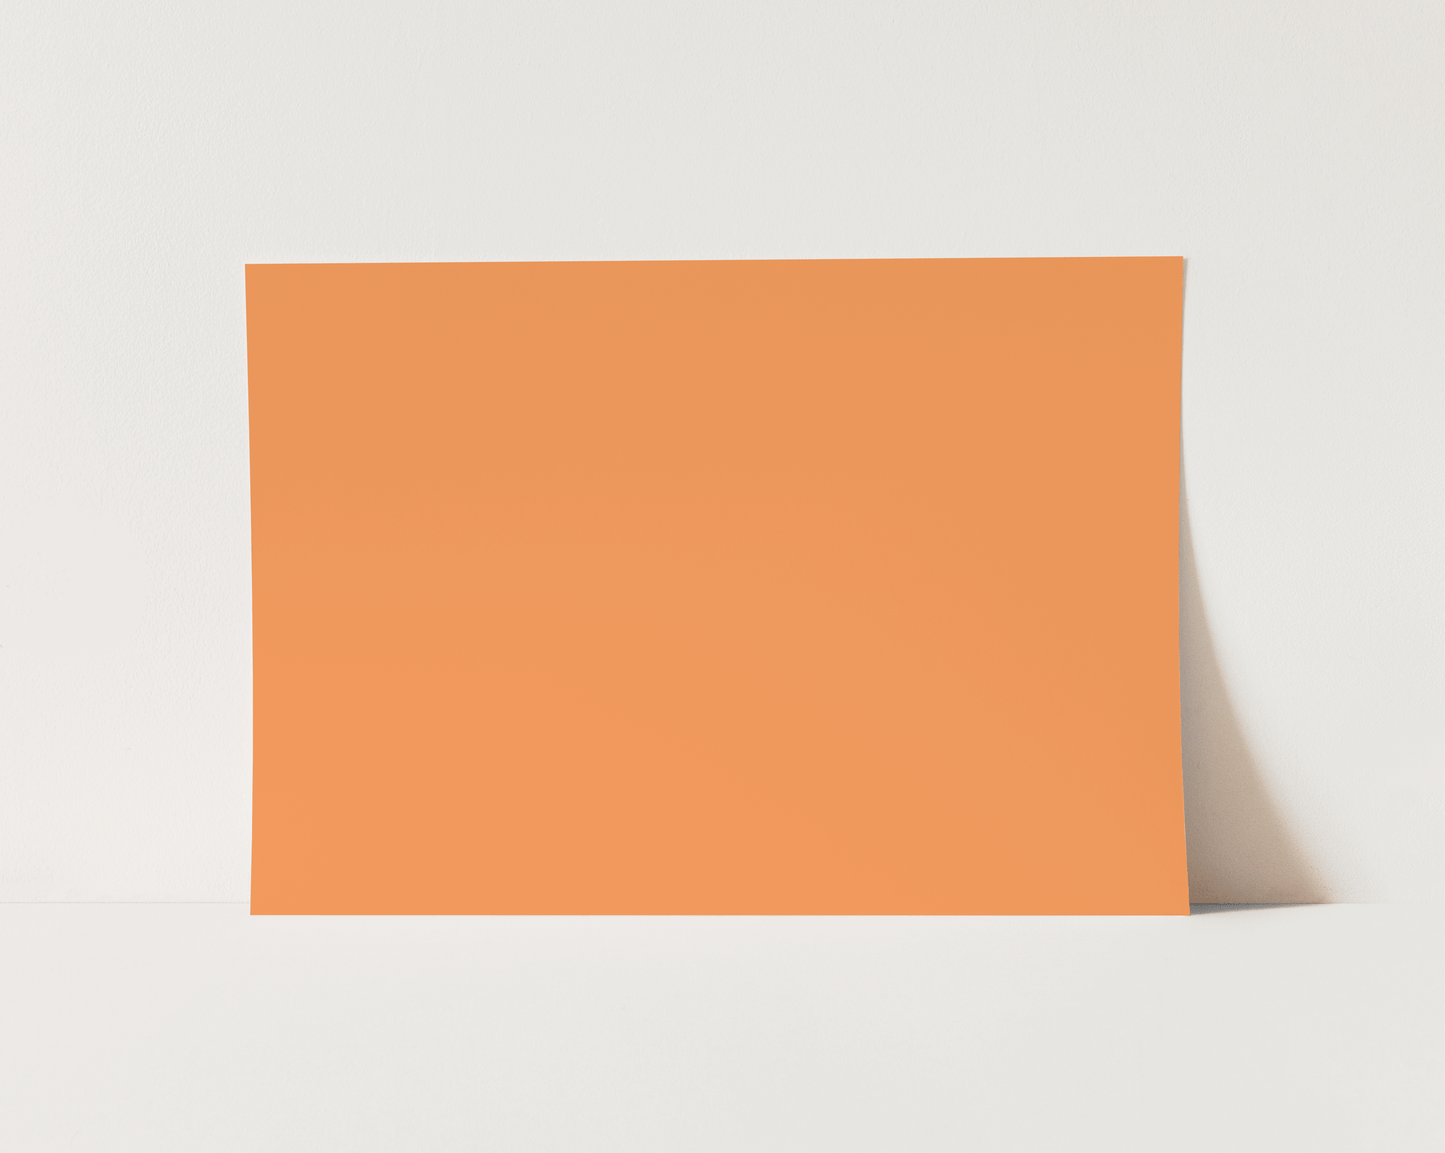 Vinyl, Waterproof Product Photography Backdrop. Orange. Australian Made. Home photoshoot and content creation.